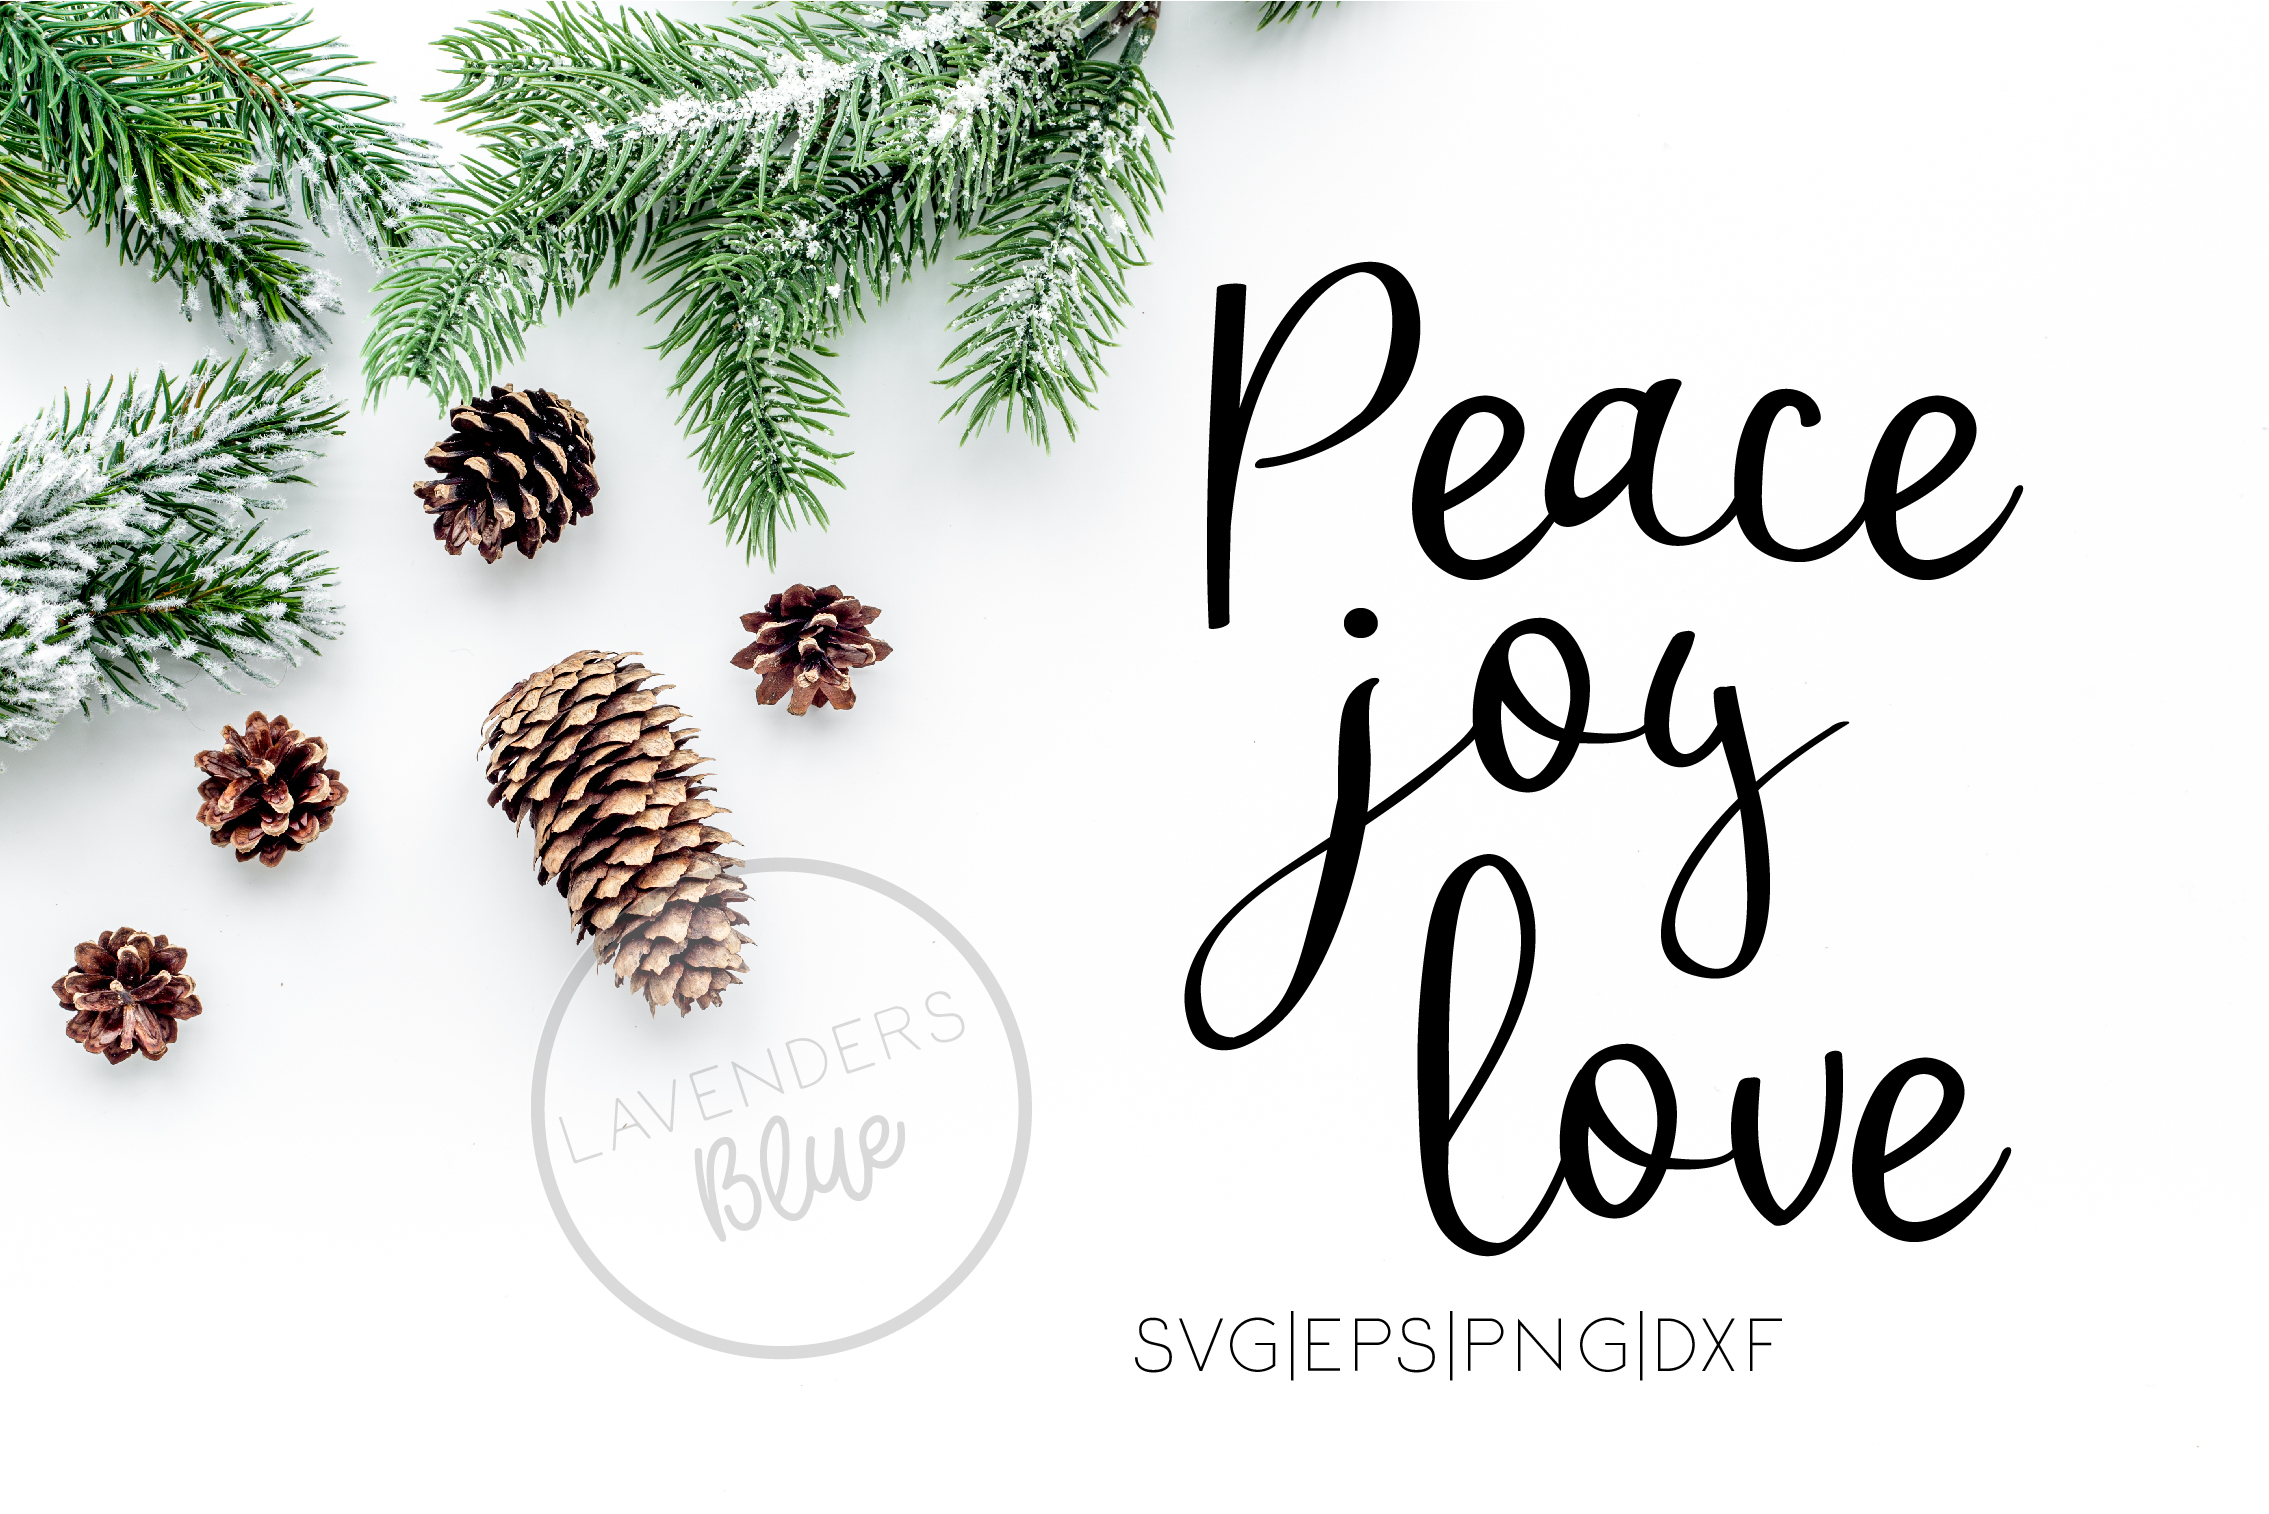 Download Peace, Joy, Love Christmas Quote Cut Out - SVG EPS PNG DXF